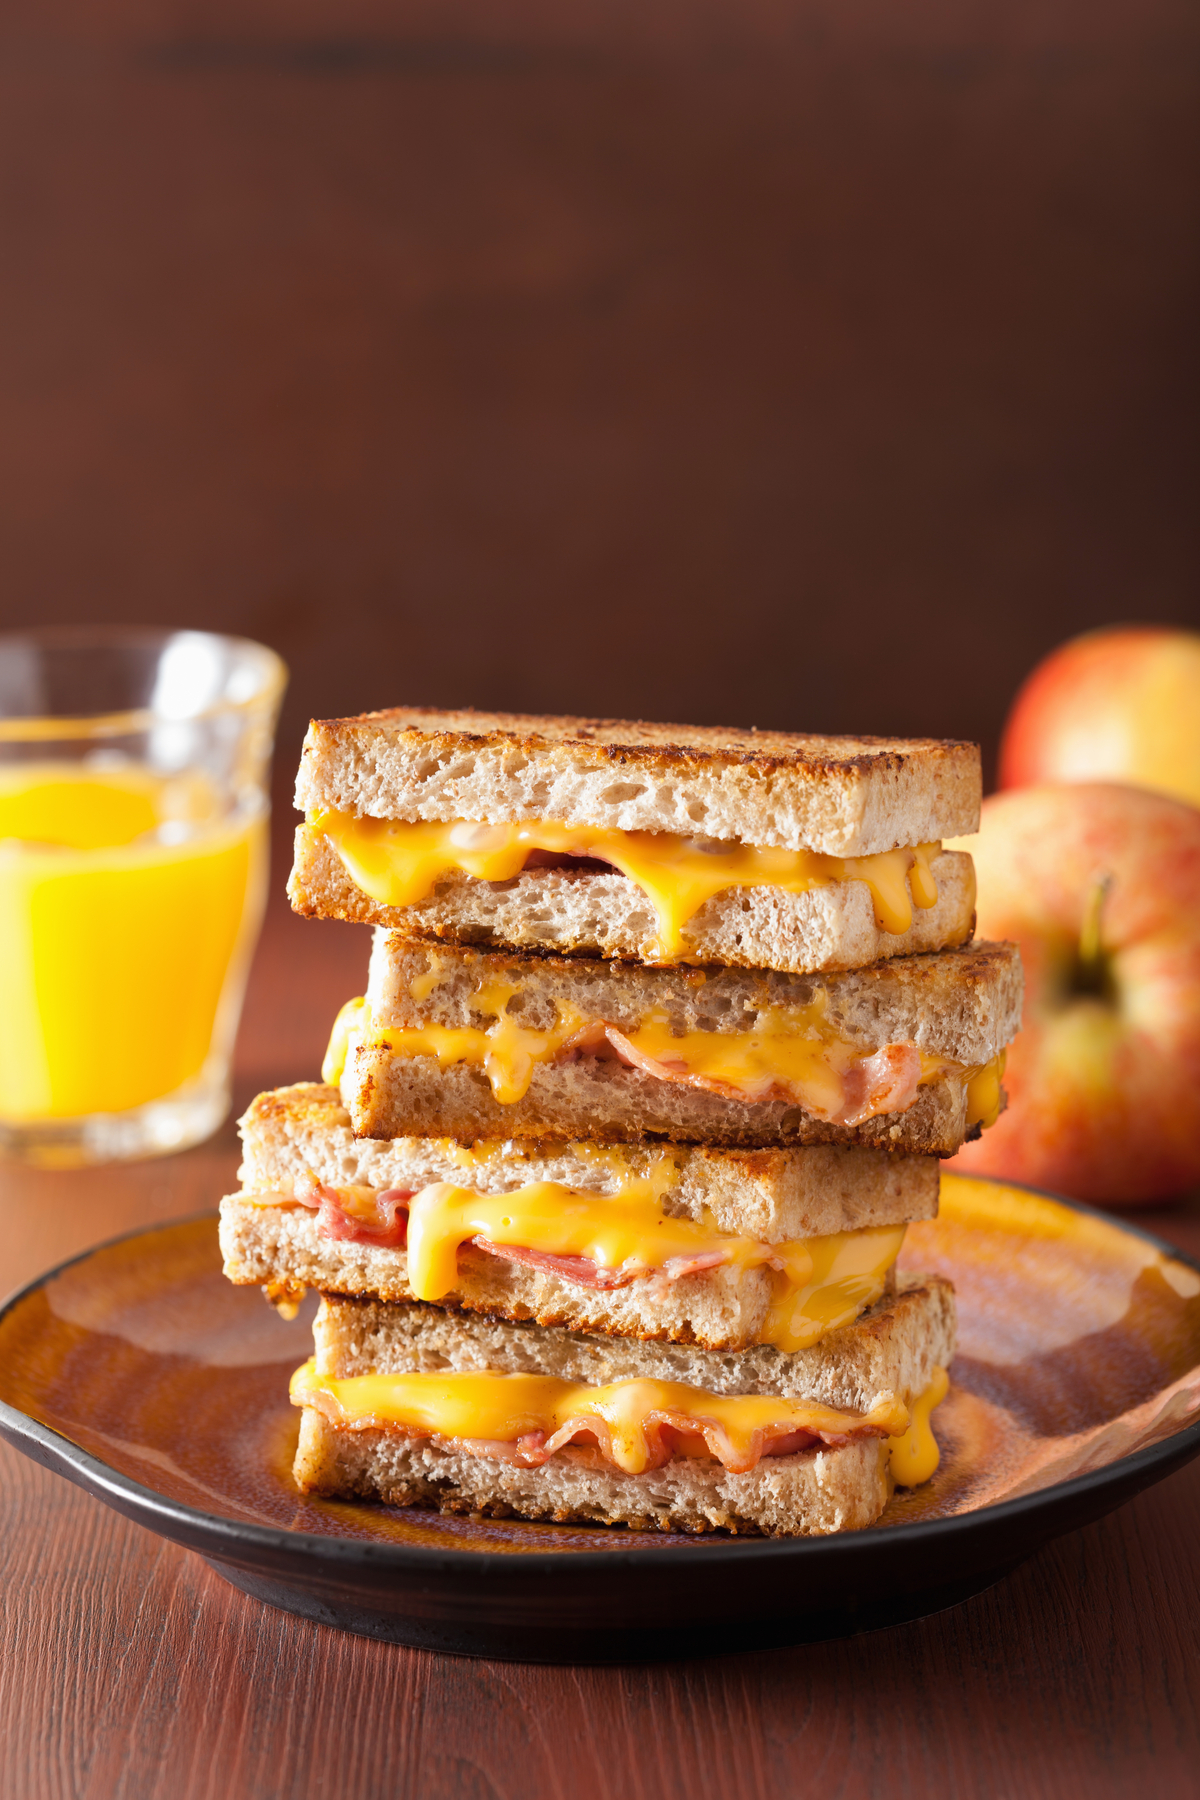 Muenster & Bacon Grilled Cheese